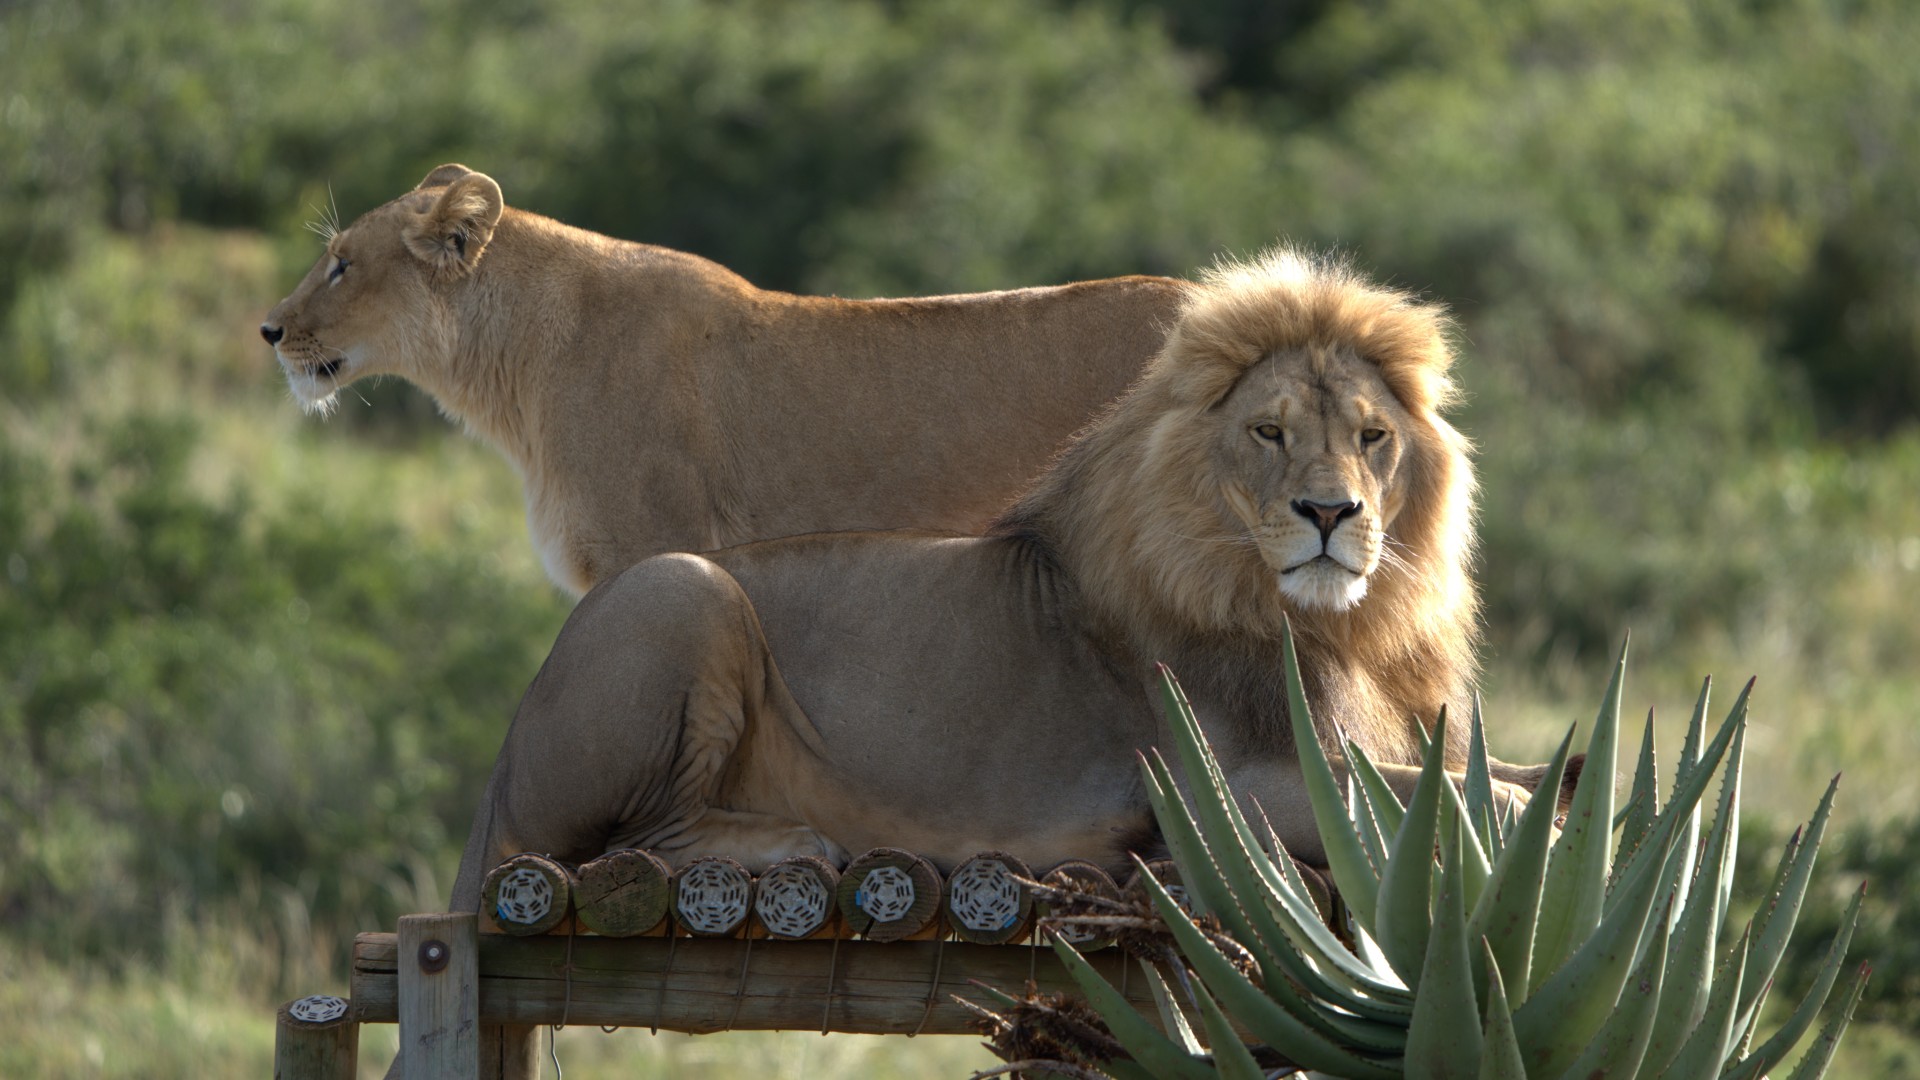 A lion lying peacefully on a wooden platform surrounded by greenery and African plants, with a lioness standing on the platform behind him